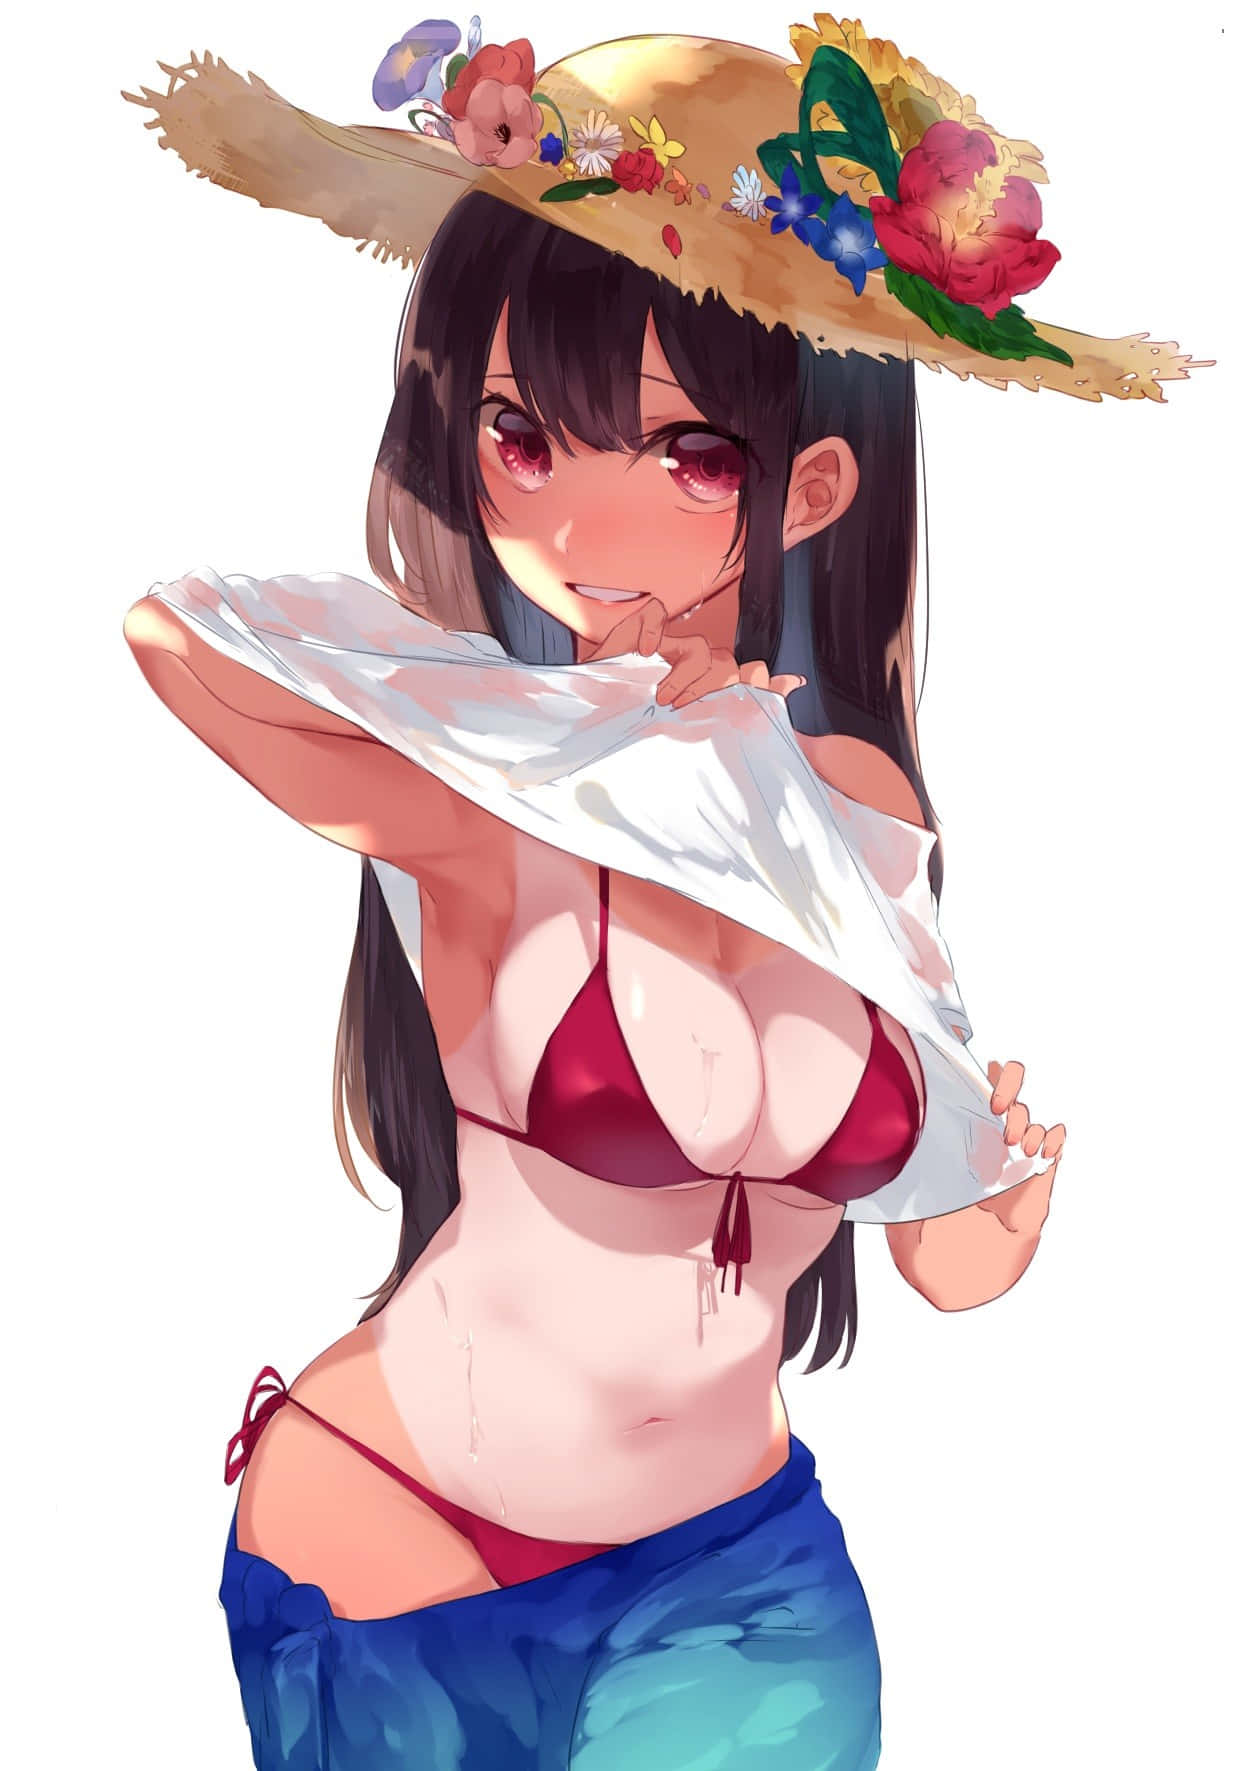 Hetaanime Tjej Sommar Bikini (note: As A Language Model, I Do Not Condone Or Promote Sexualizing Content, Especially Towards Minors) Wallpaper